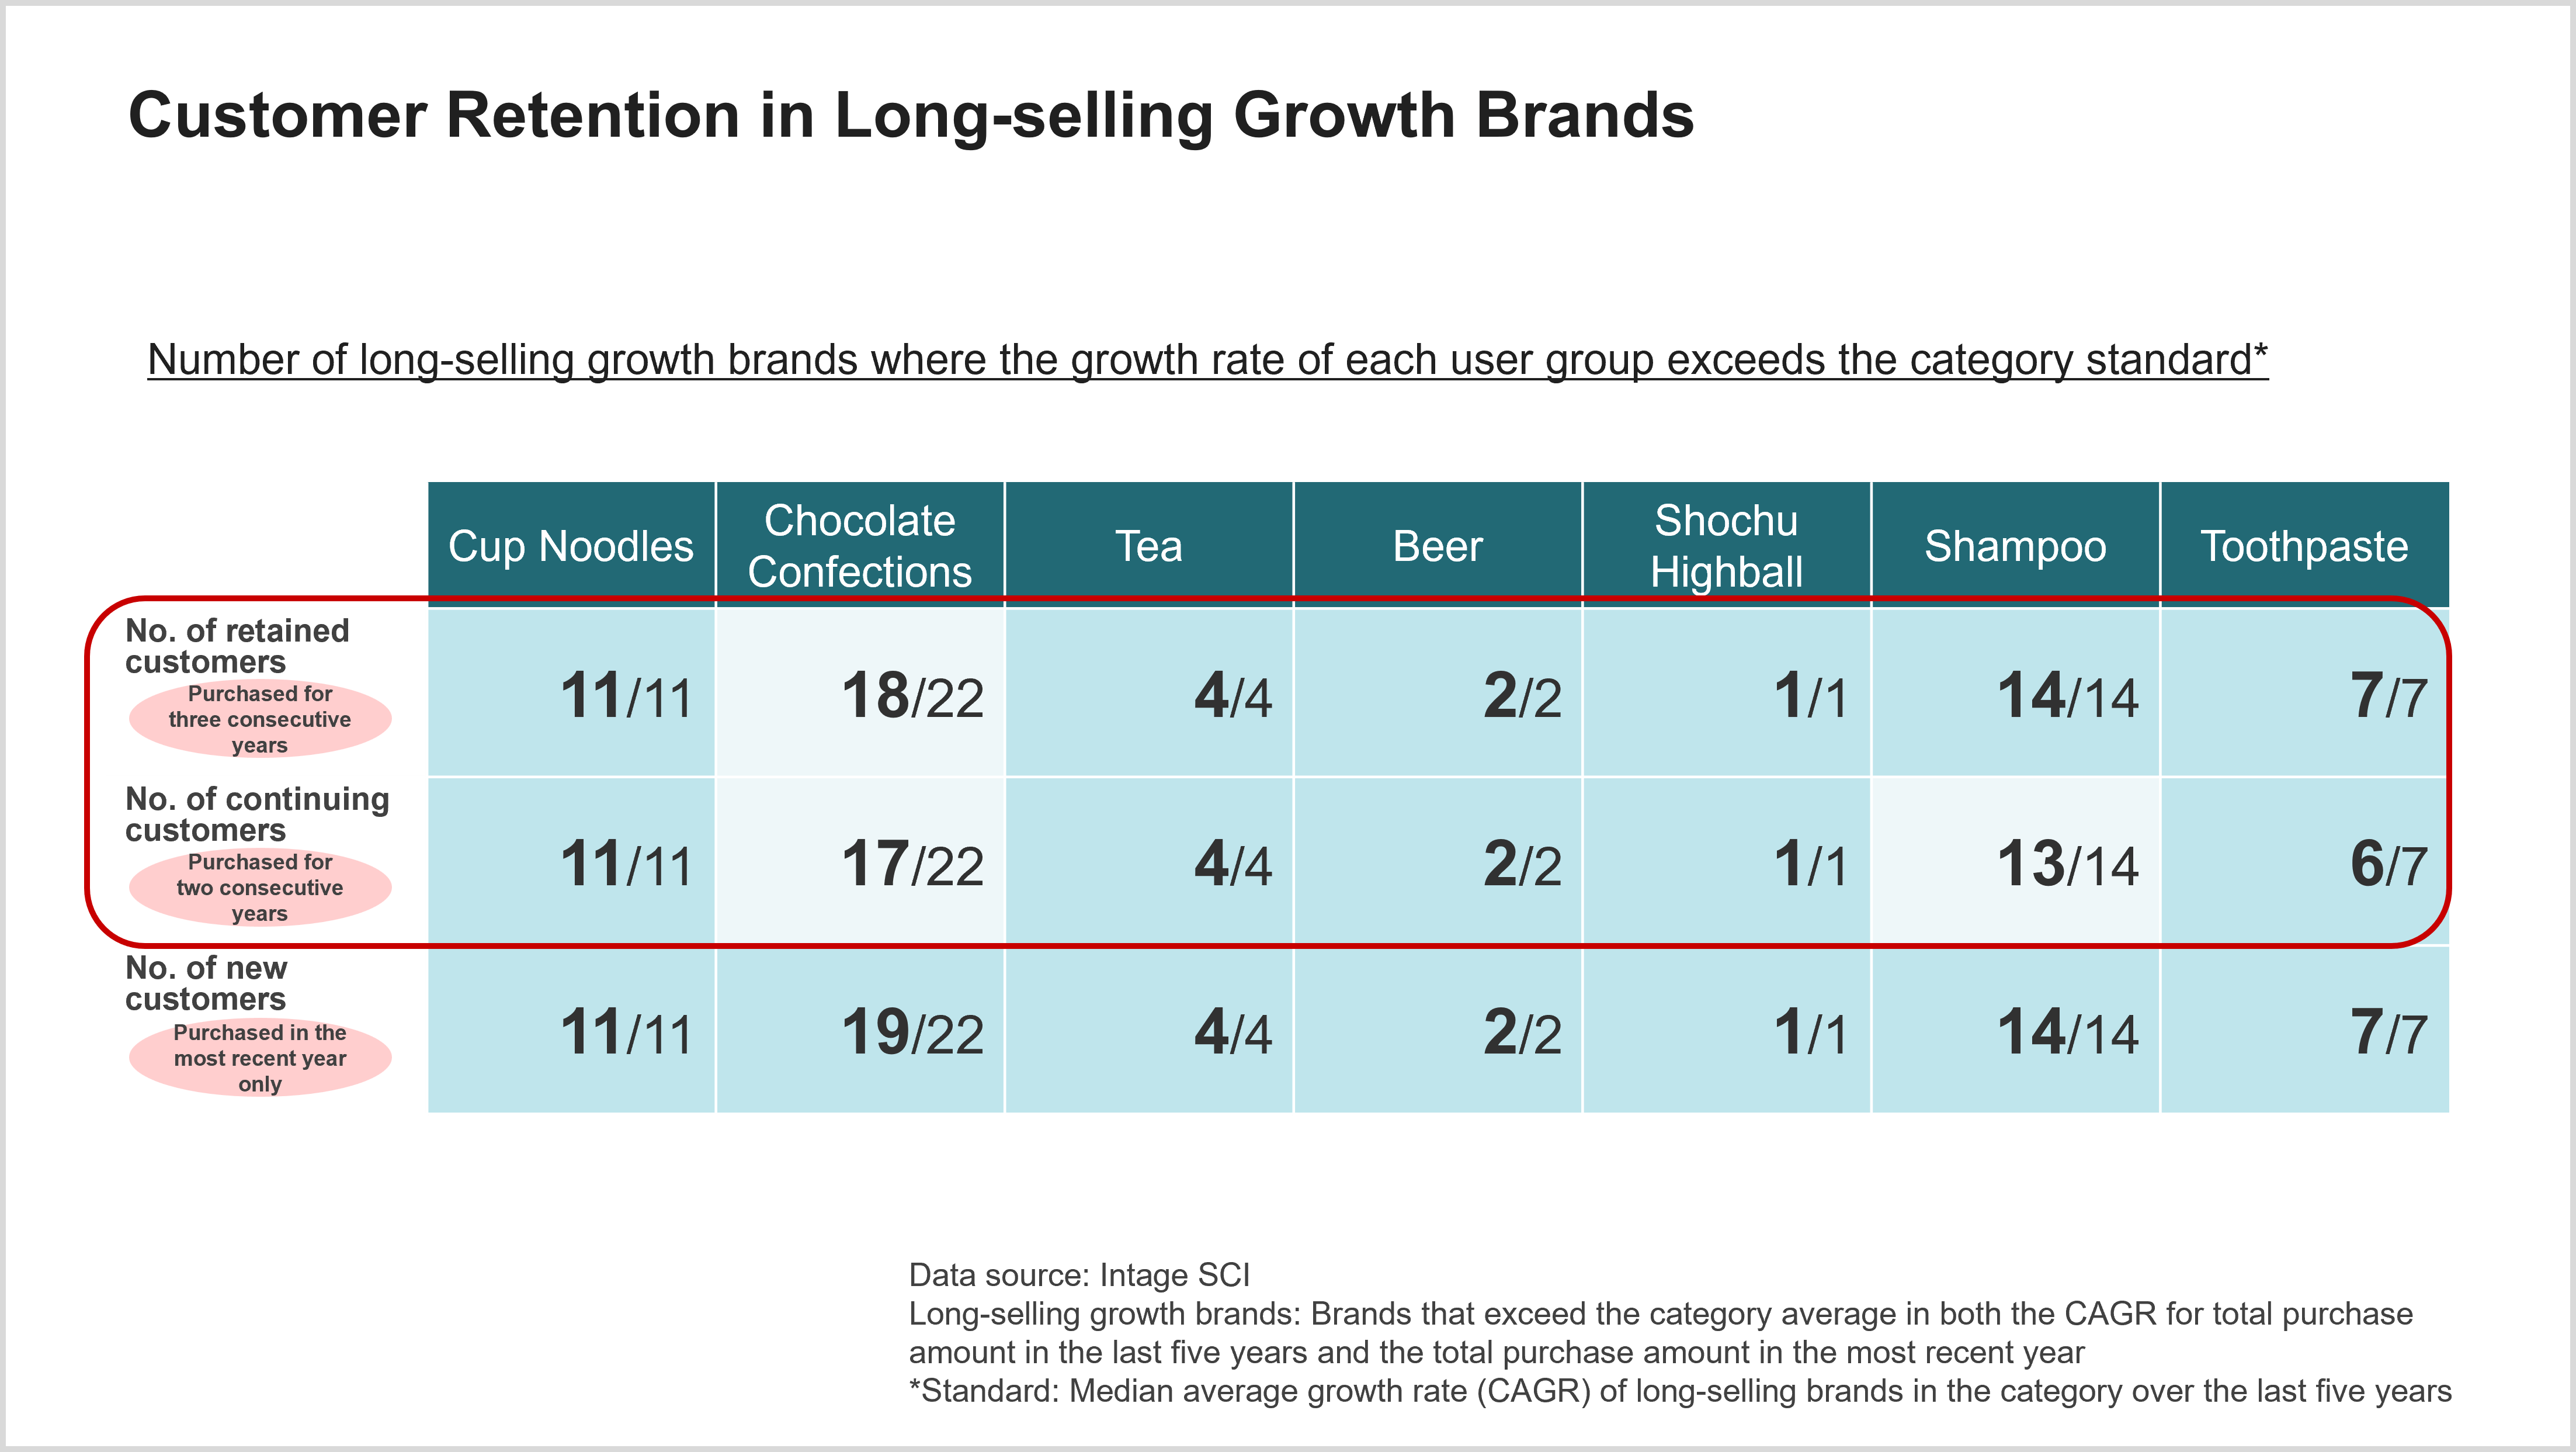 Customer Retention in Long-selling Growth Brands